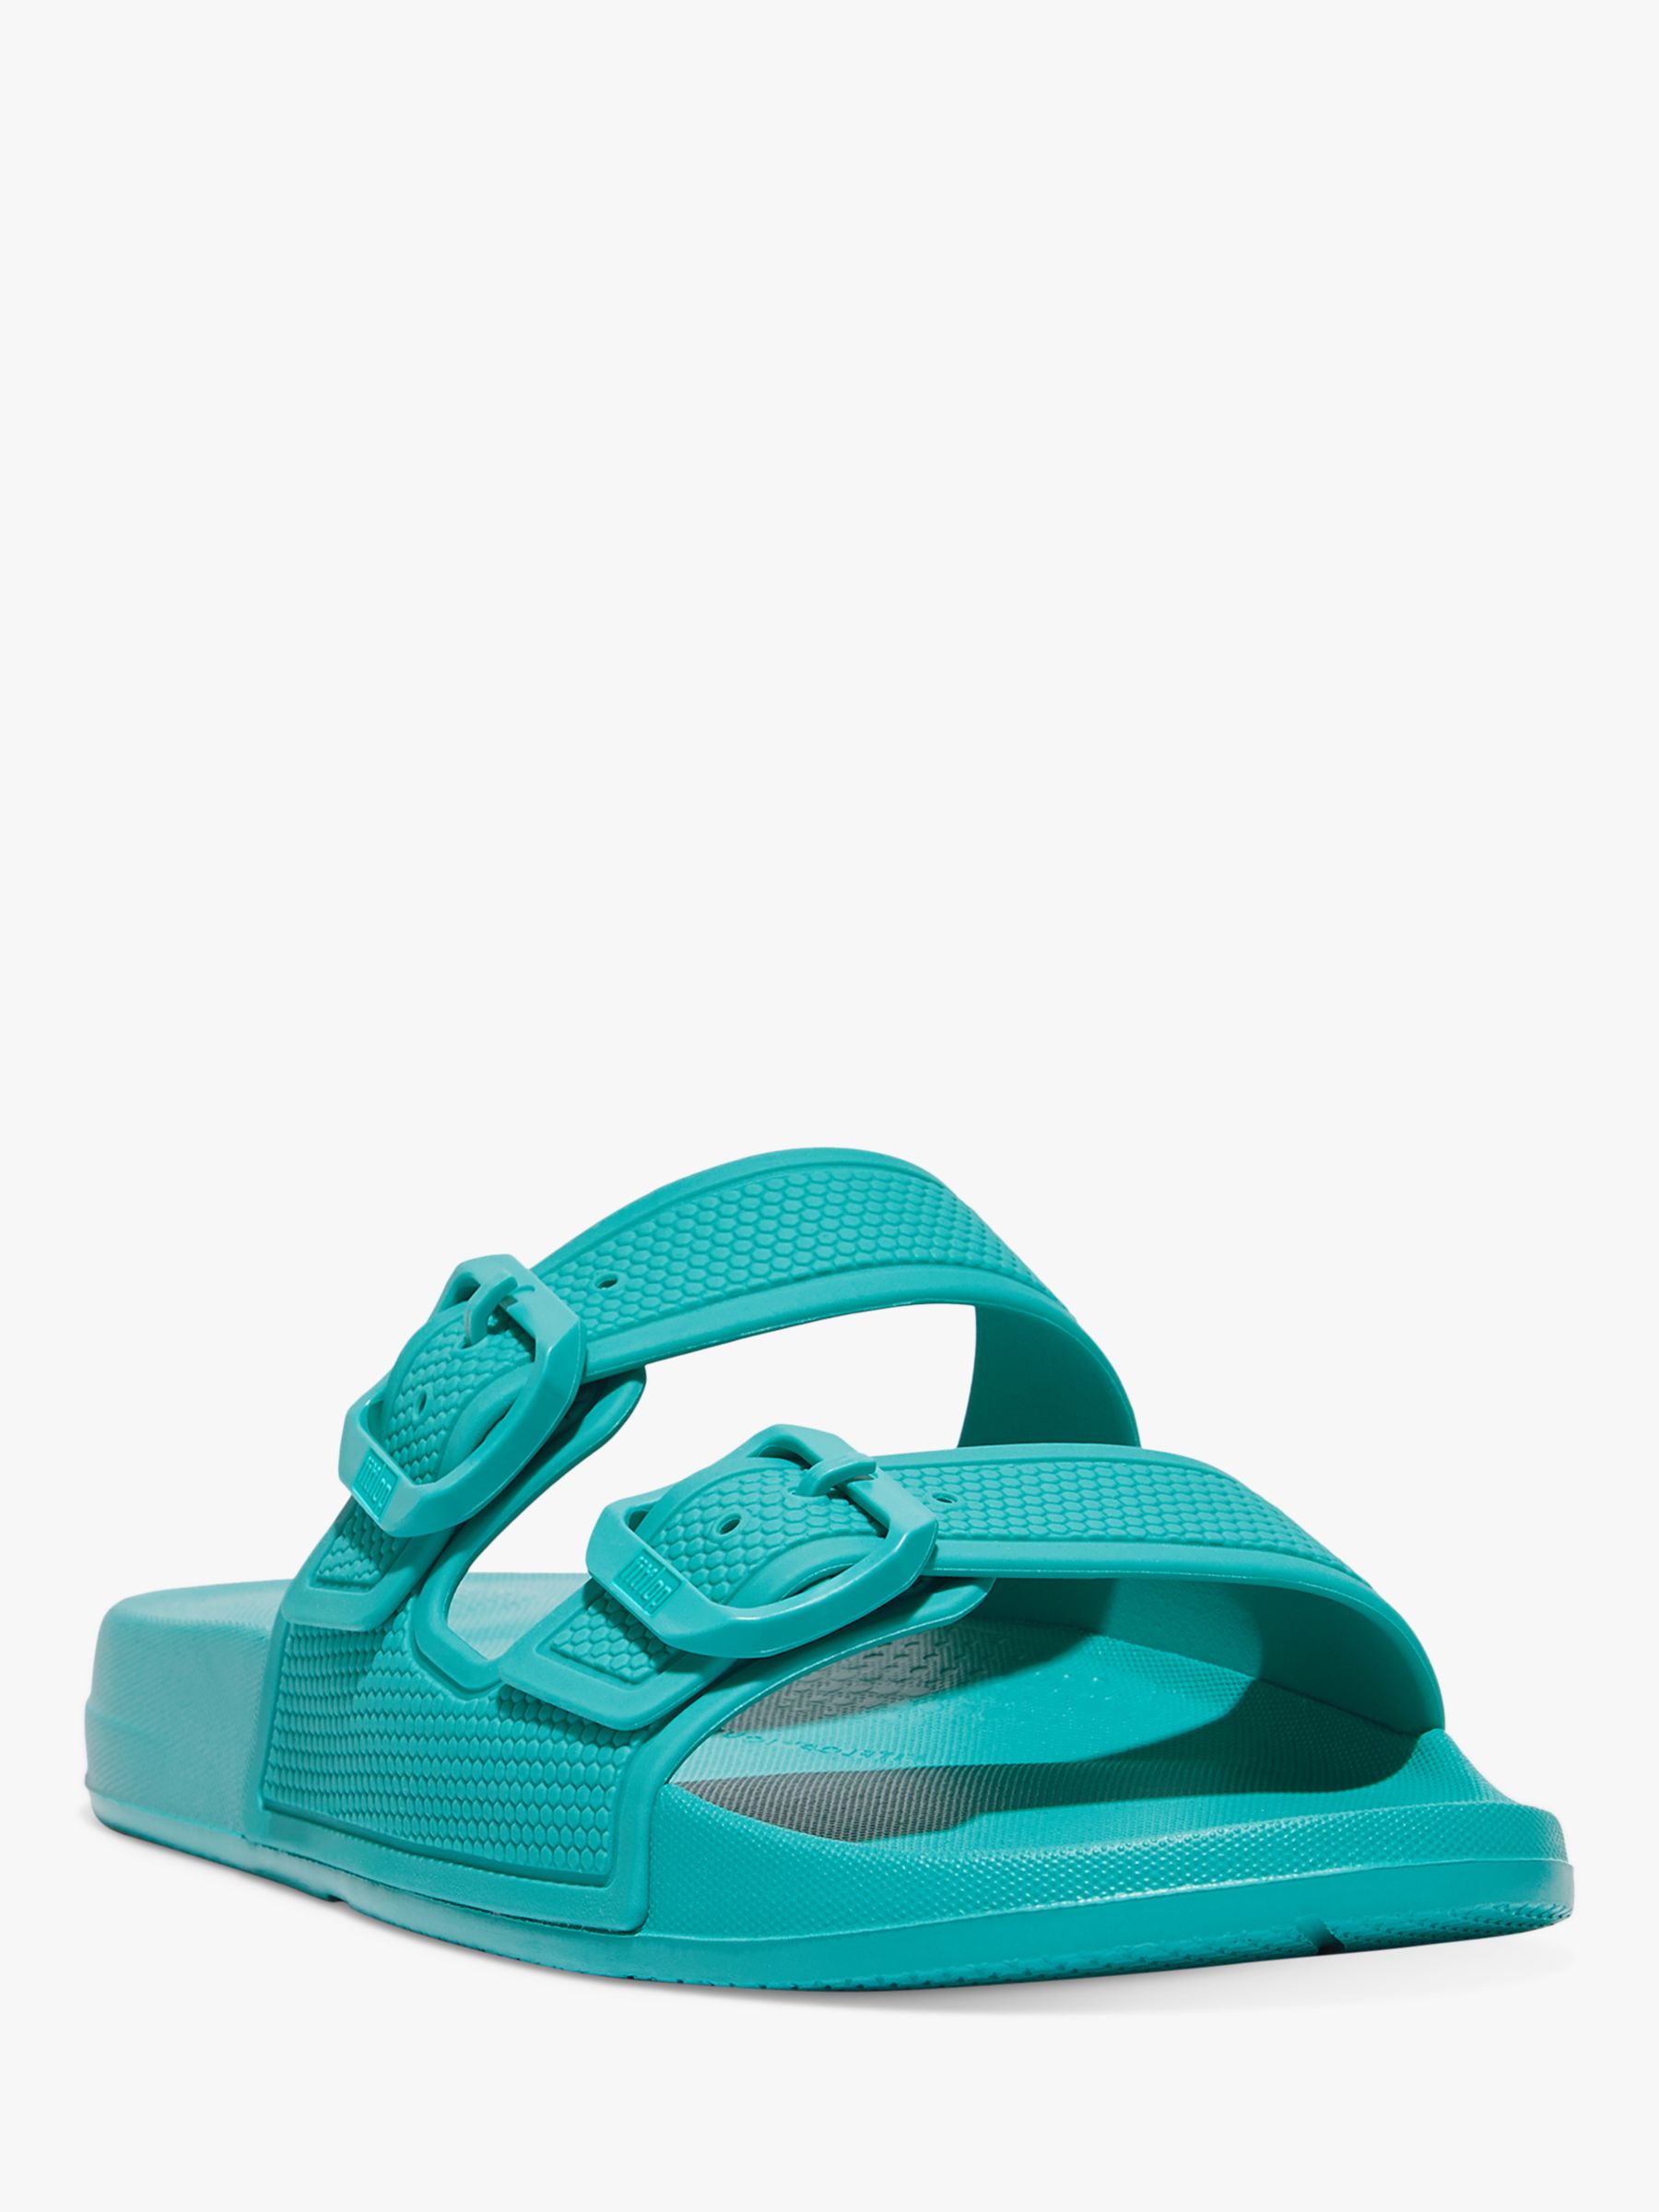 FitFlop IQushion Slider Sandals, Tahiti Blue at John Lewis & Partners